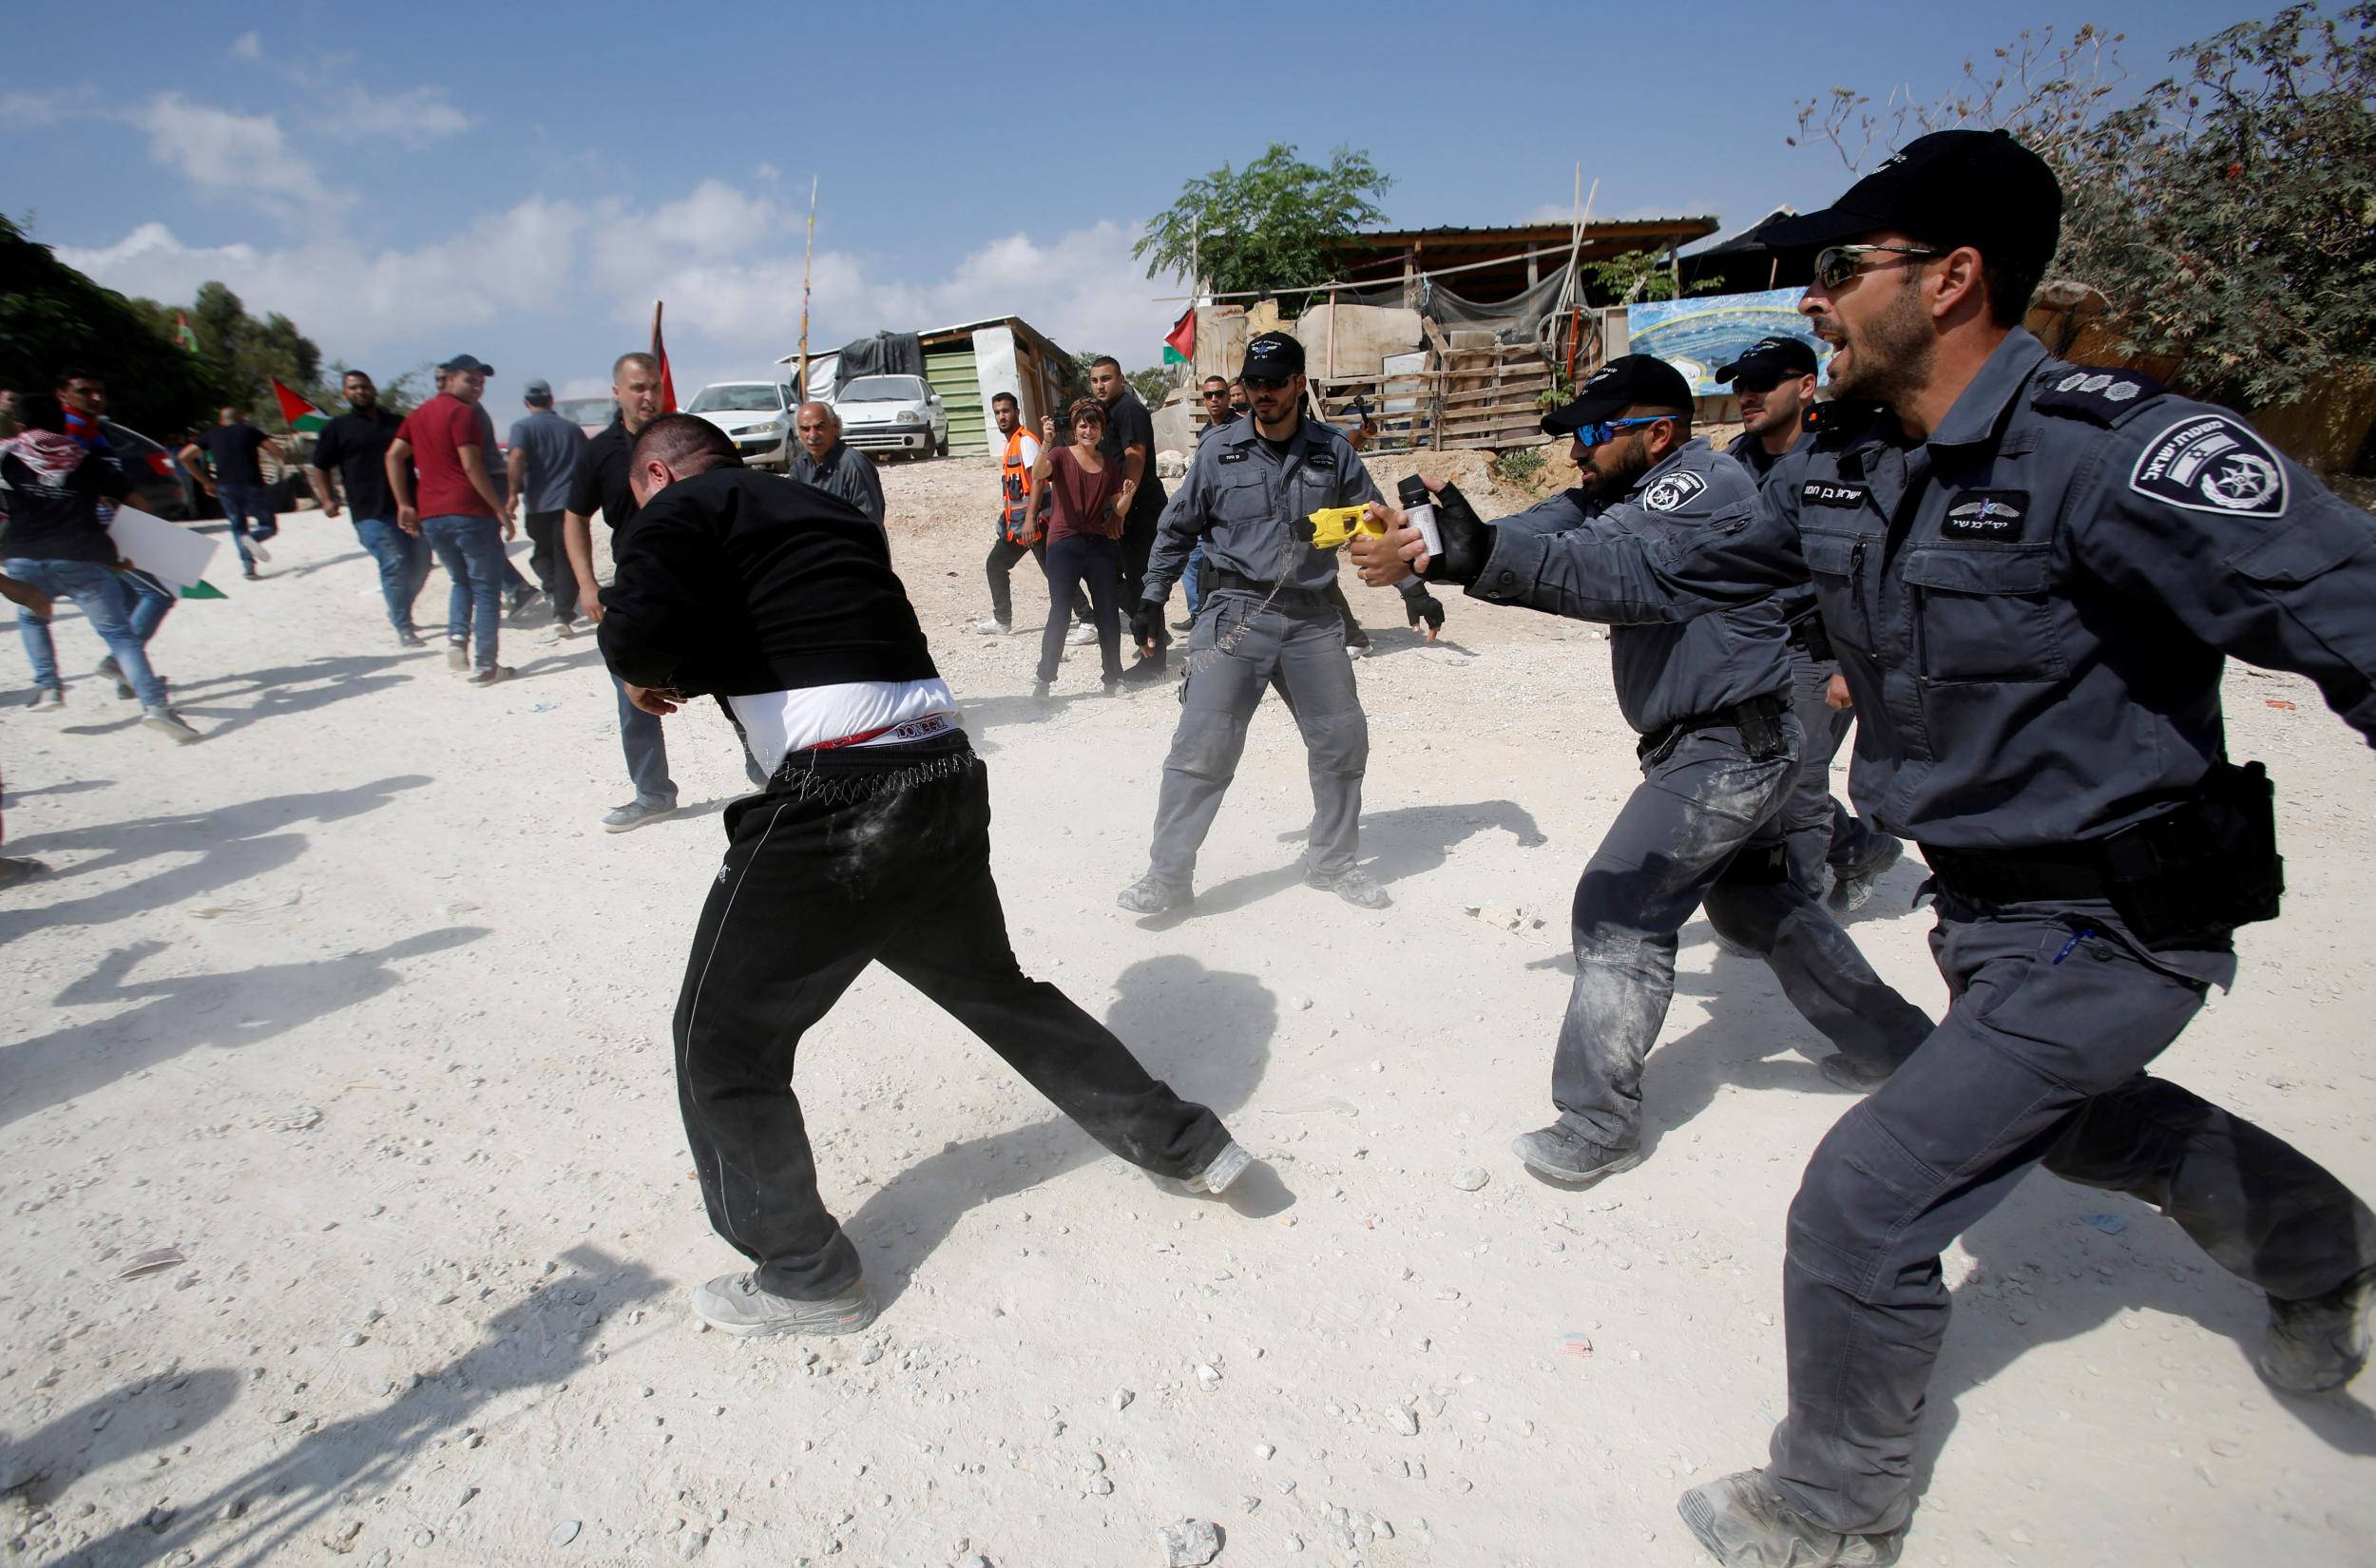 Israeli policemen disperse activists in the Palestinian Bedouin village of Khan al-Ahmar that Israel plans to demolish, in the occupied West Bank October 17, 2018.